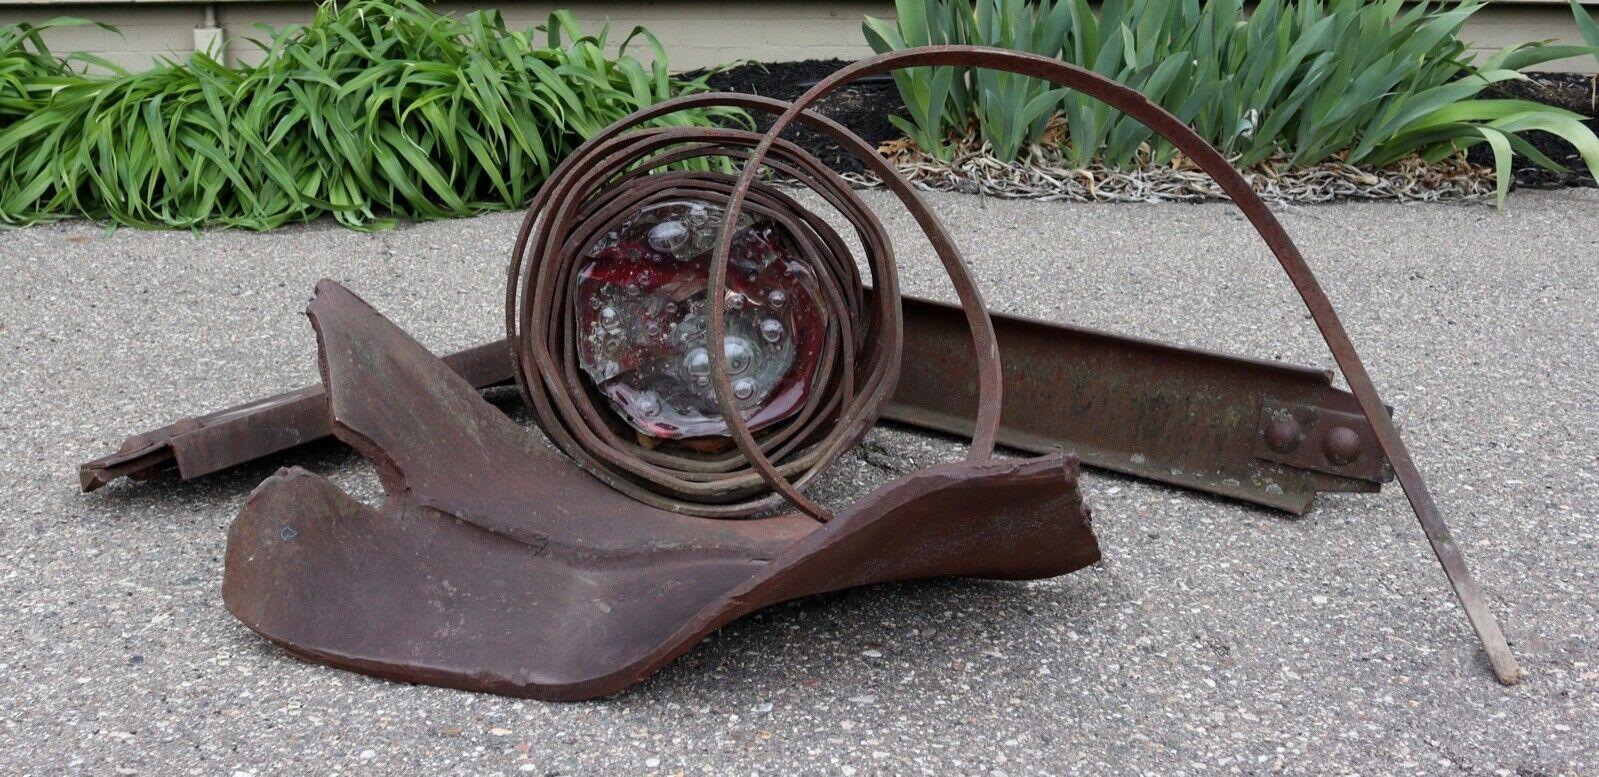 For your consideration is an eclectic metal and glass contemporary outdoor sculpture by Detroit artist Albert Young (22 x 55 x 24). Albert Young has been operating an independent glass studio/school since 1983 and has been a pivotal member of the